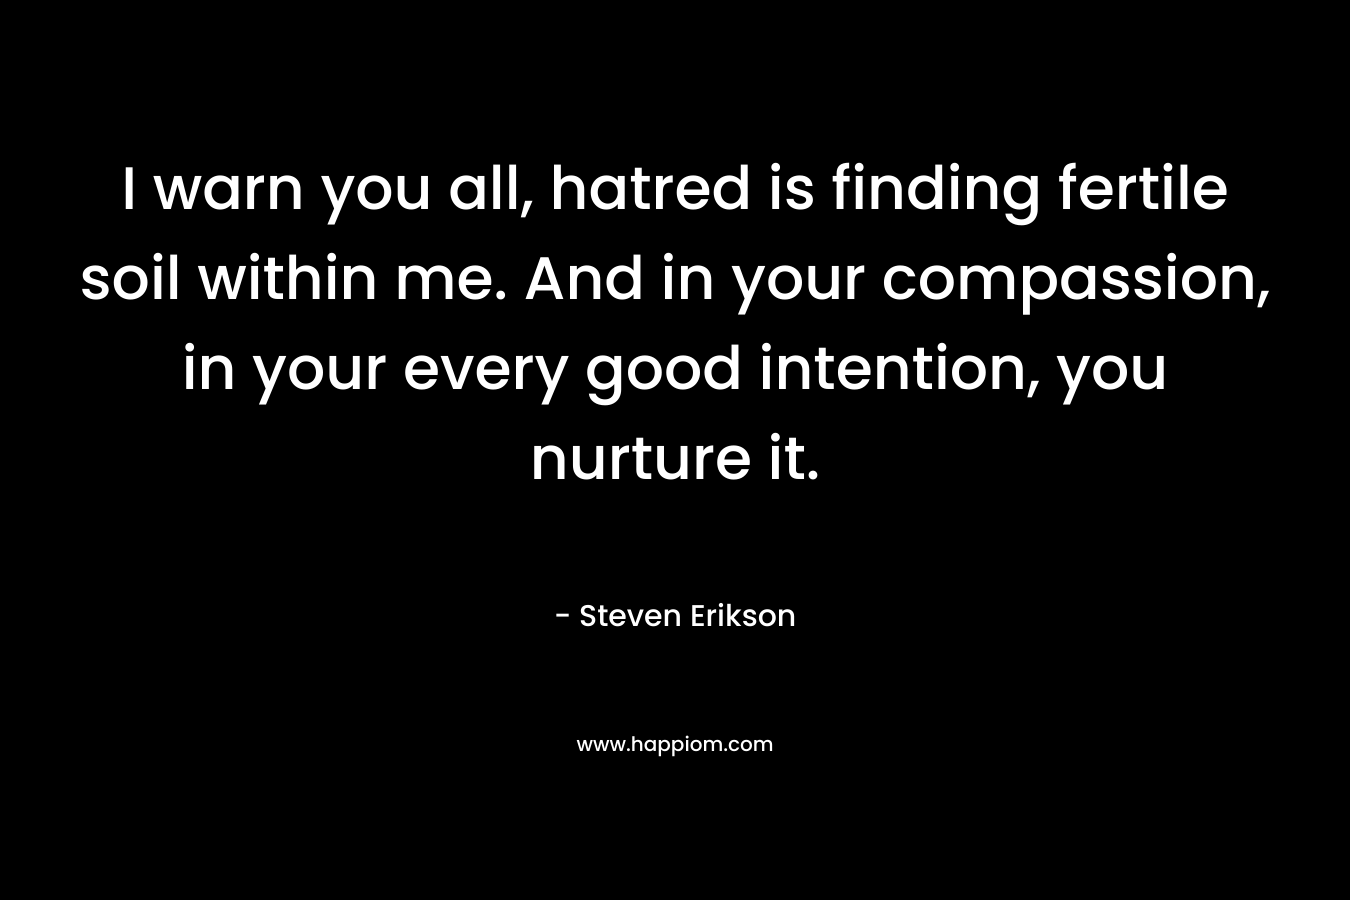 I warn you all, hatred is finding fertile soil within me. And in your compassion, in your every good intention, you nurture it. – Steven Erikson